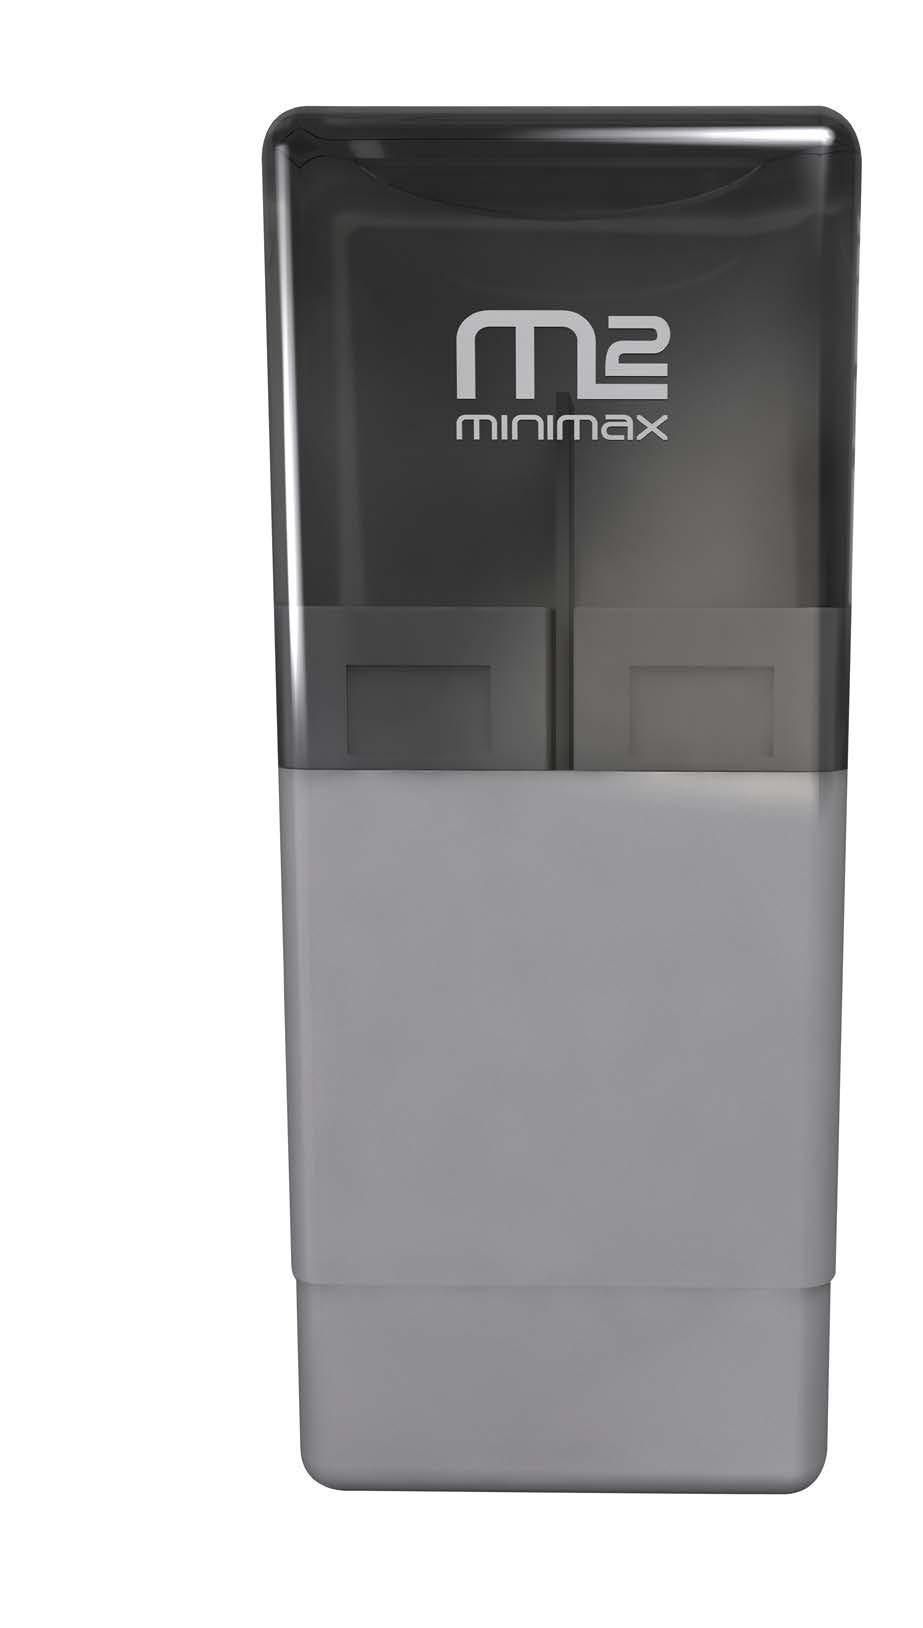 490mm 19.3" The Minimax M2 The Minimax M2 is the latest development in water softening technology, and is currently the market leader in fully automatic water softening design.